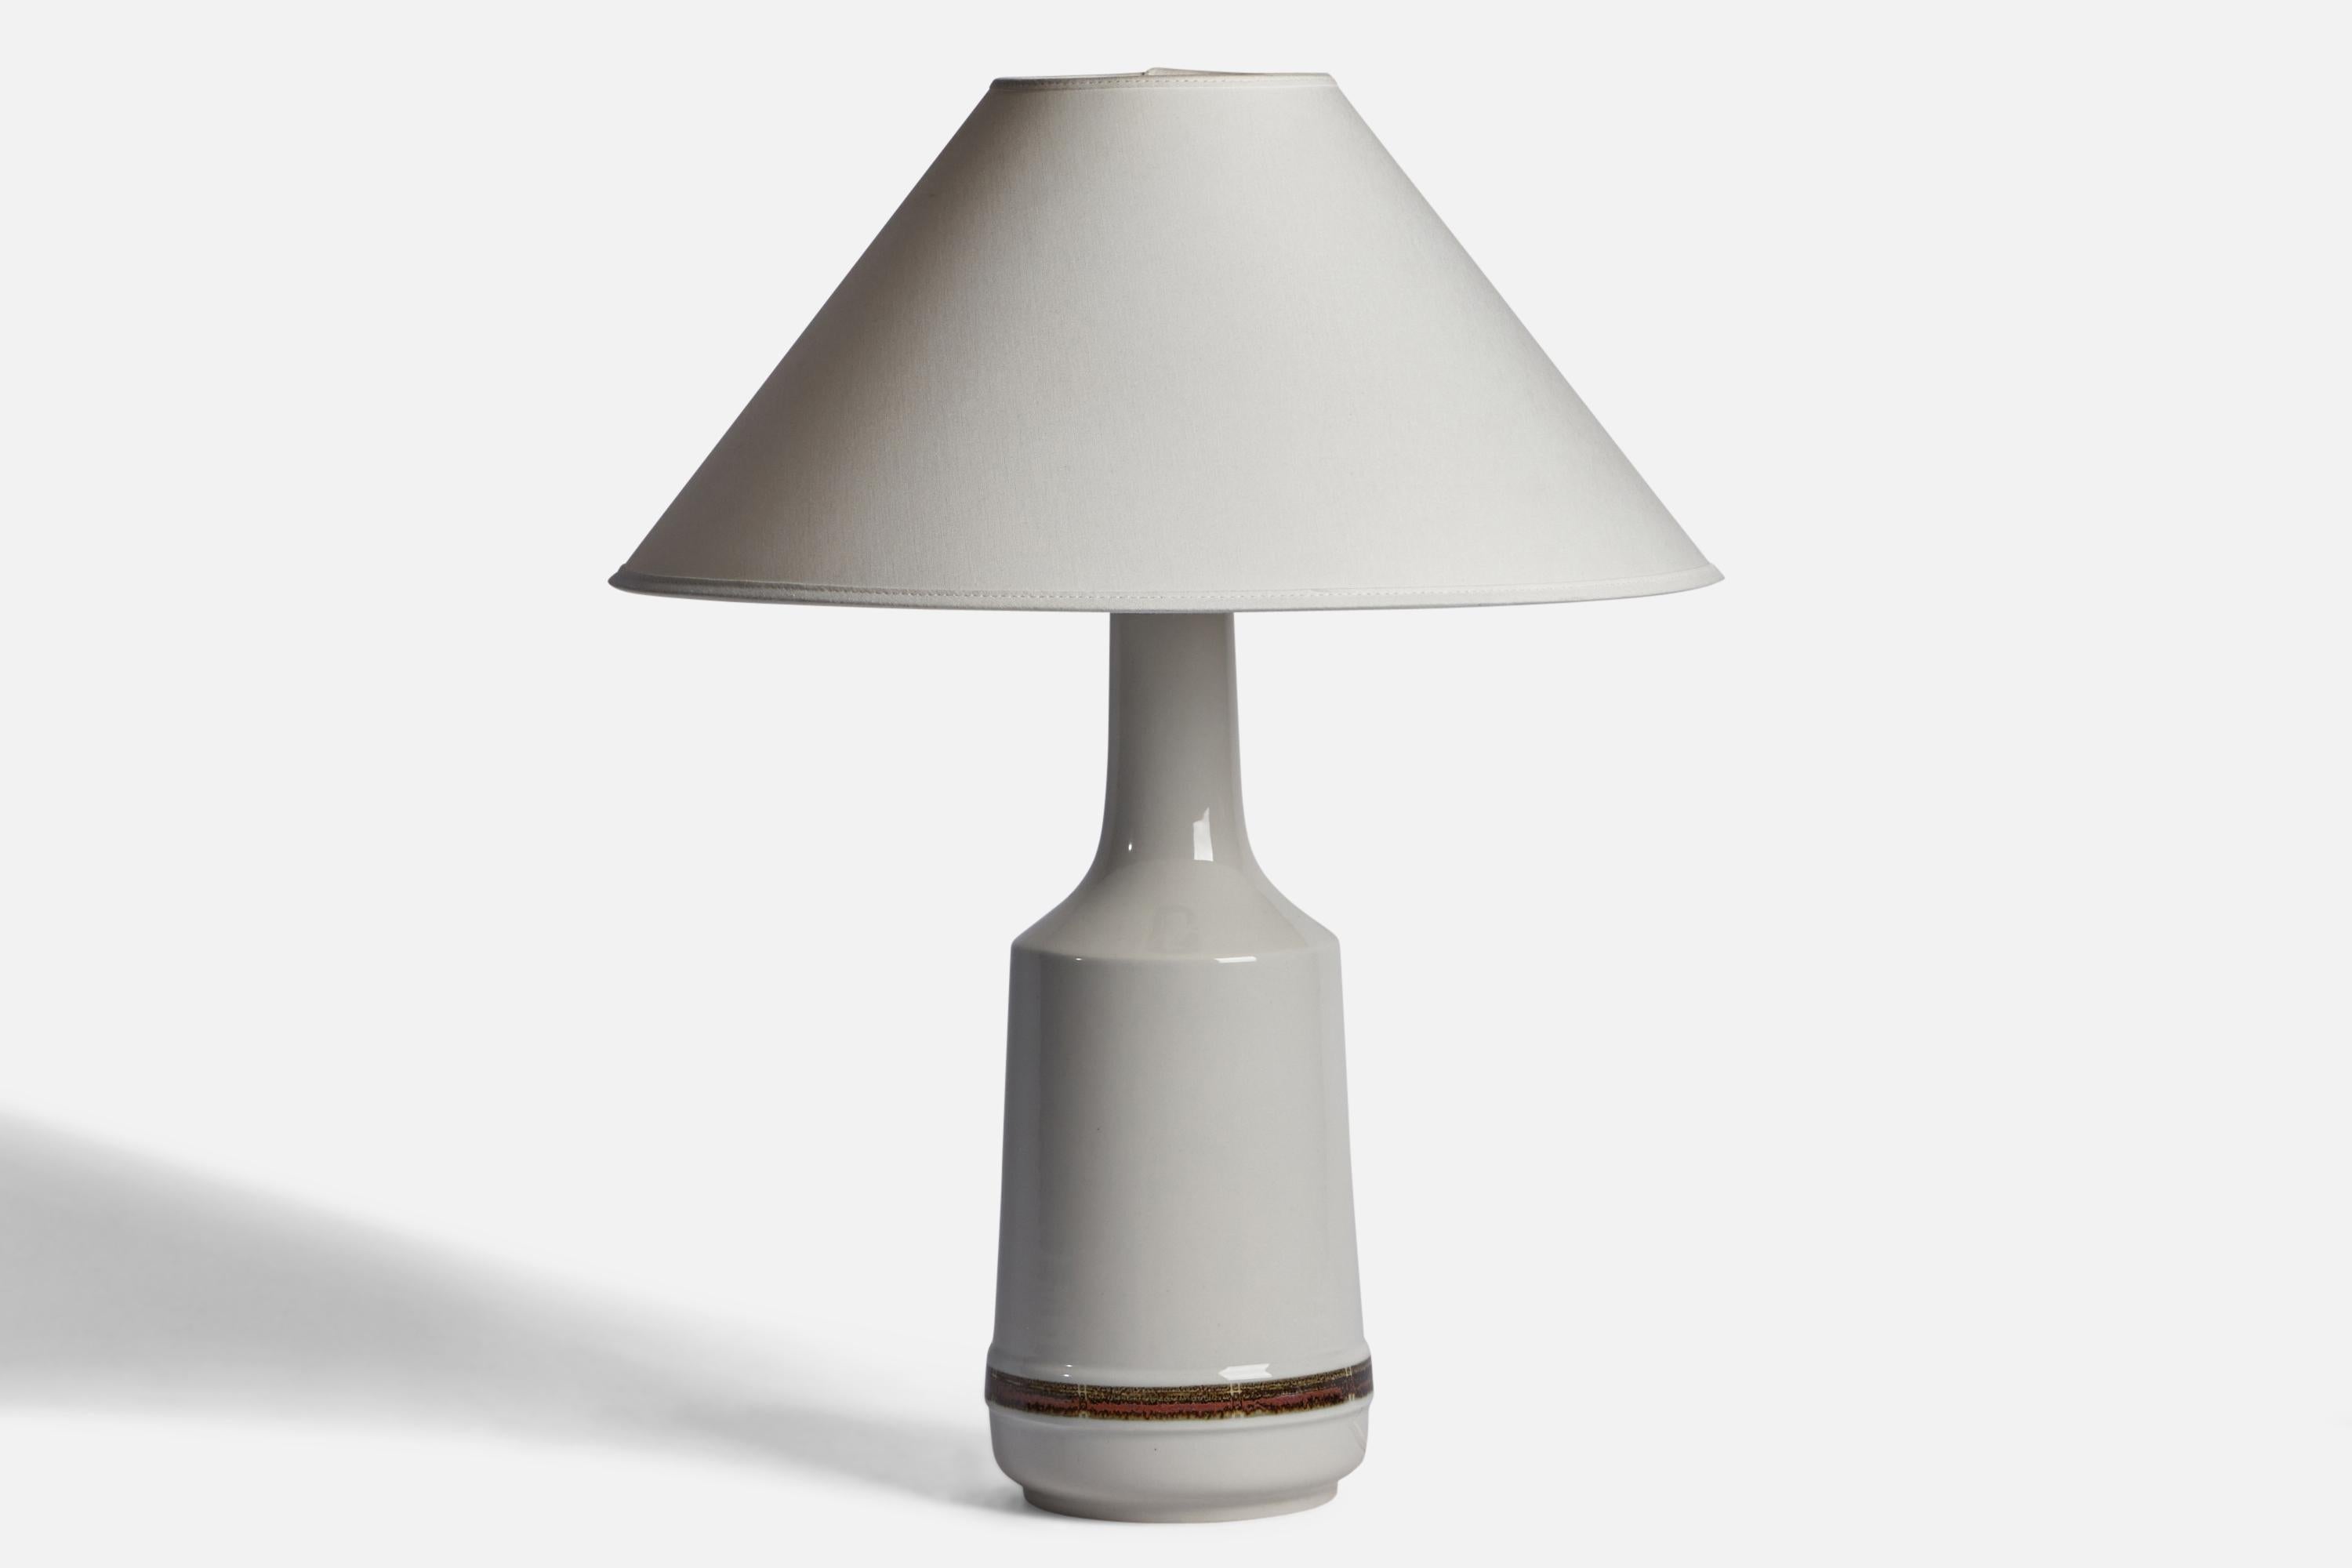 A white-glazed stoneware table lamp designed and produced by Desiree, Denmark, 1960s.

Dimensions of Lamp (inches): 16.25” H x 6” Diameter
Dimensions of Shade (inches): 4.5” Top Diameter x 16” Bottom Diameter x 7.25” H
Dimensions of Lamp with Shade